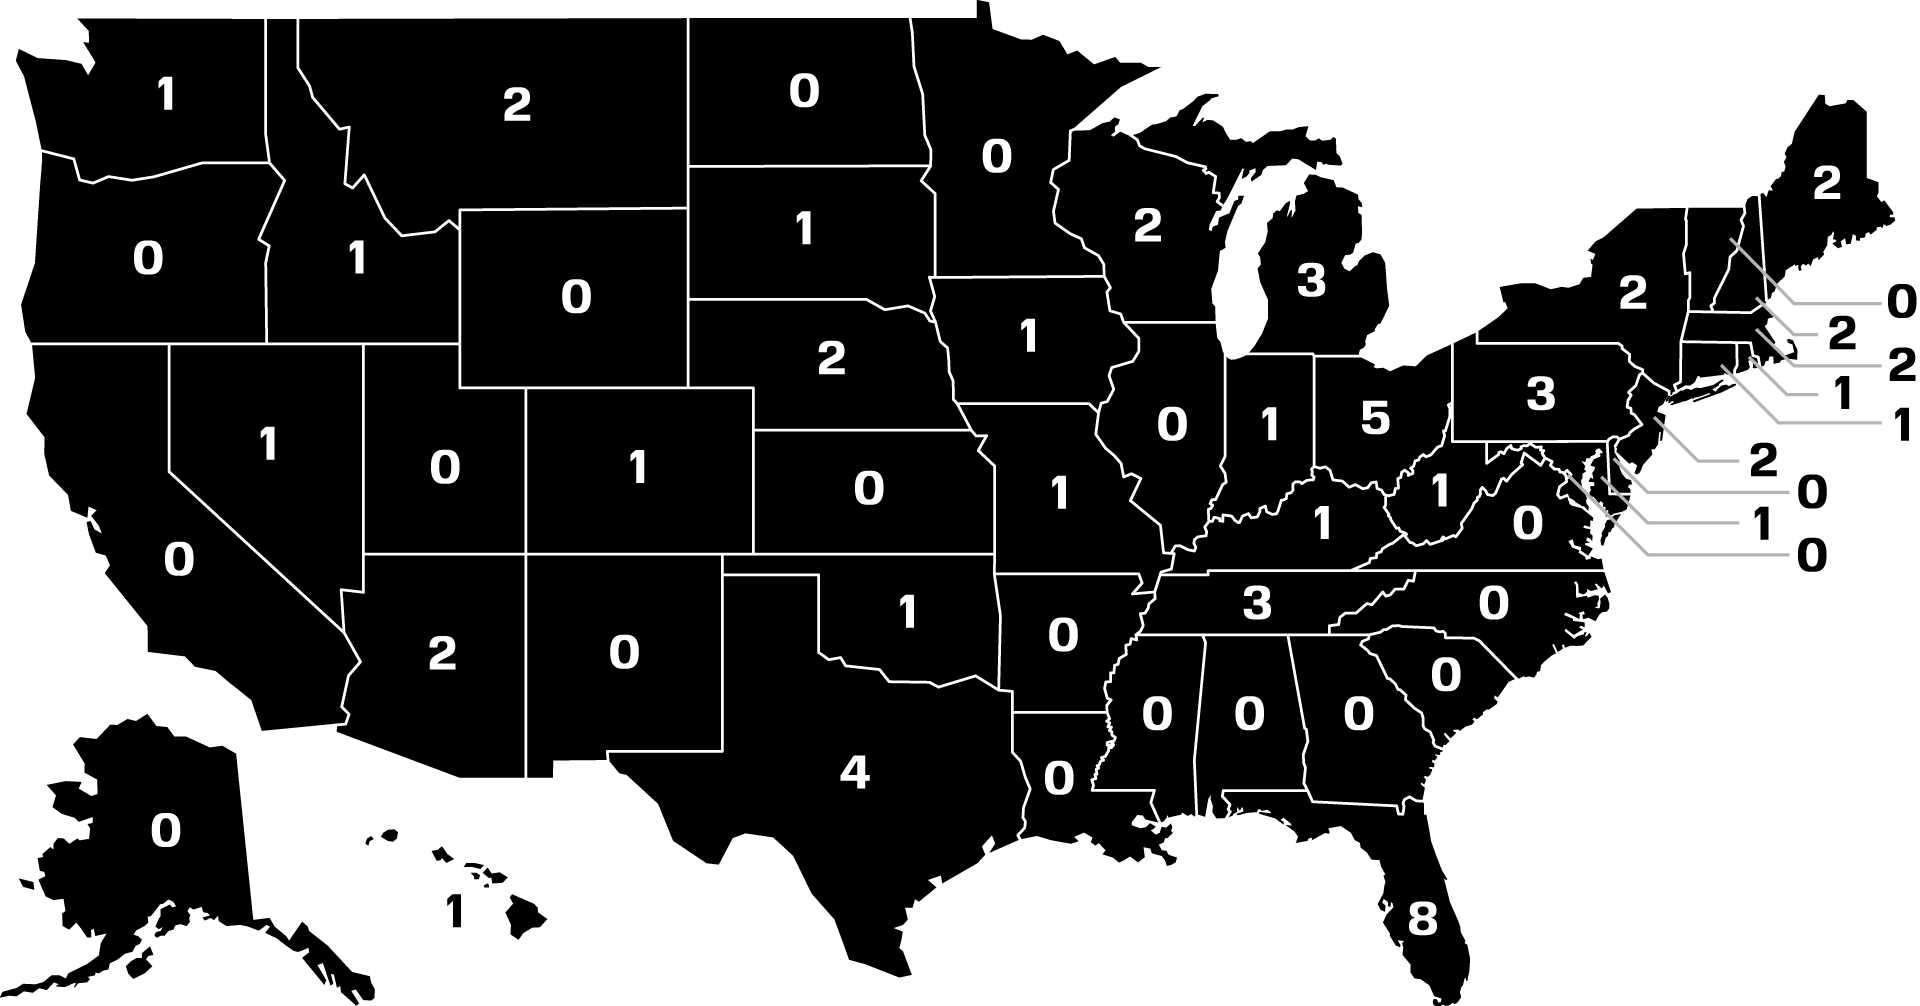 a map of the United States with the number of Neo-Nazi groups in each state